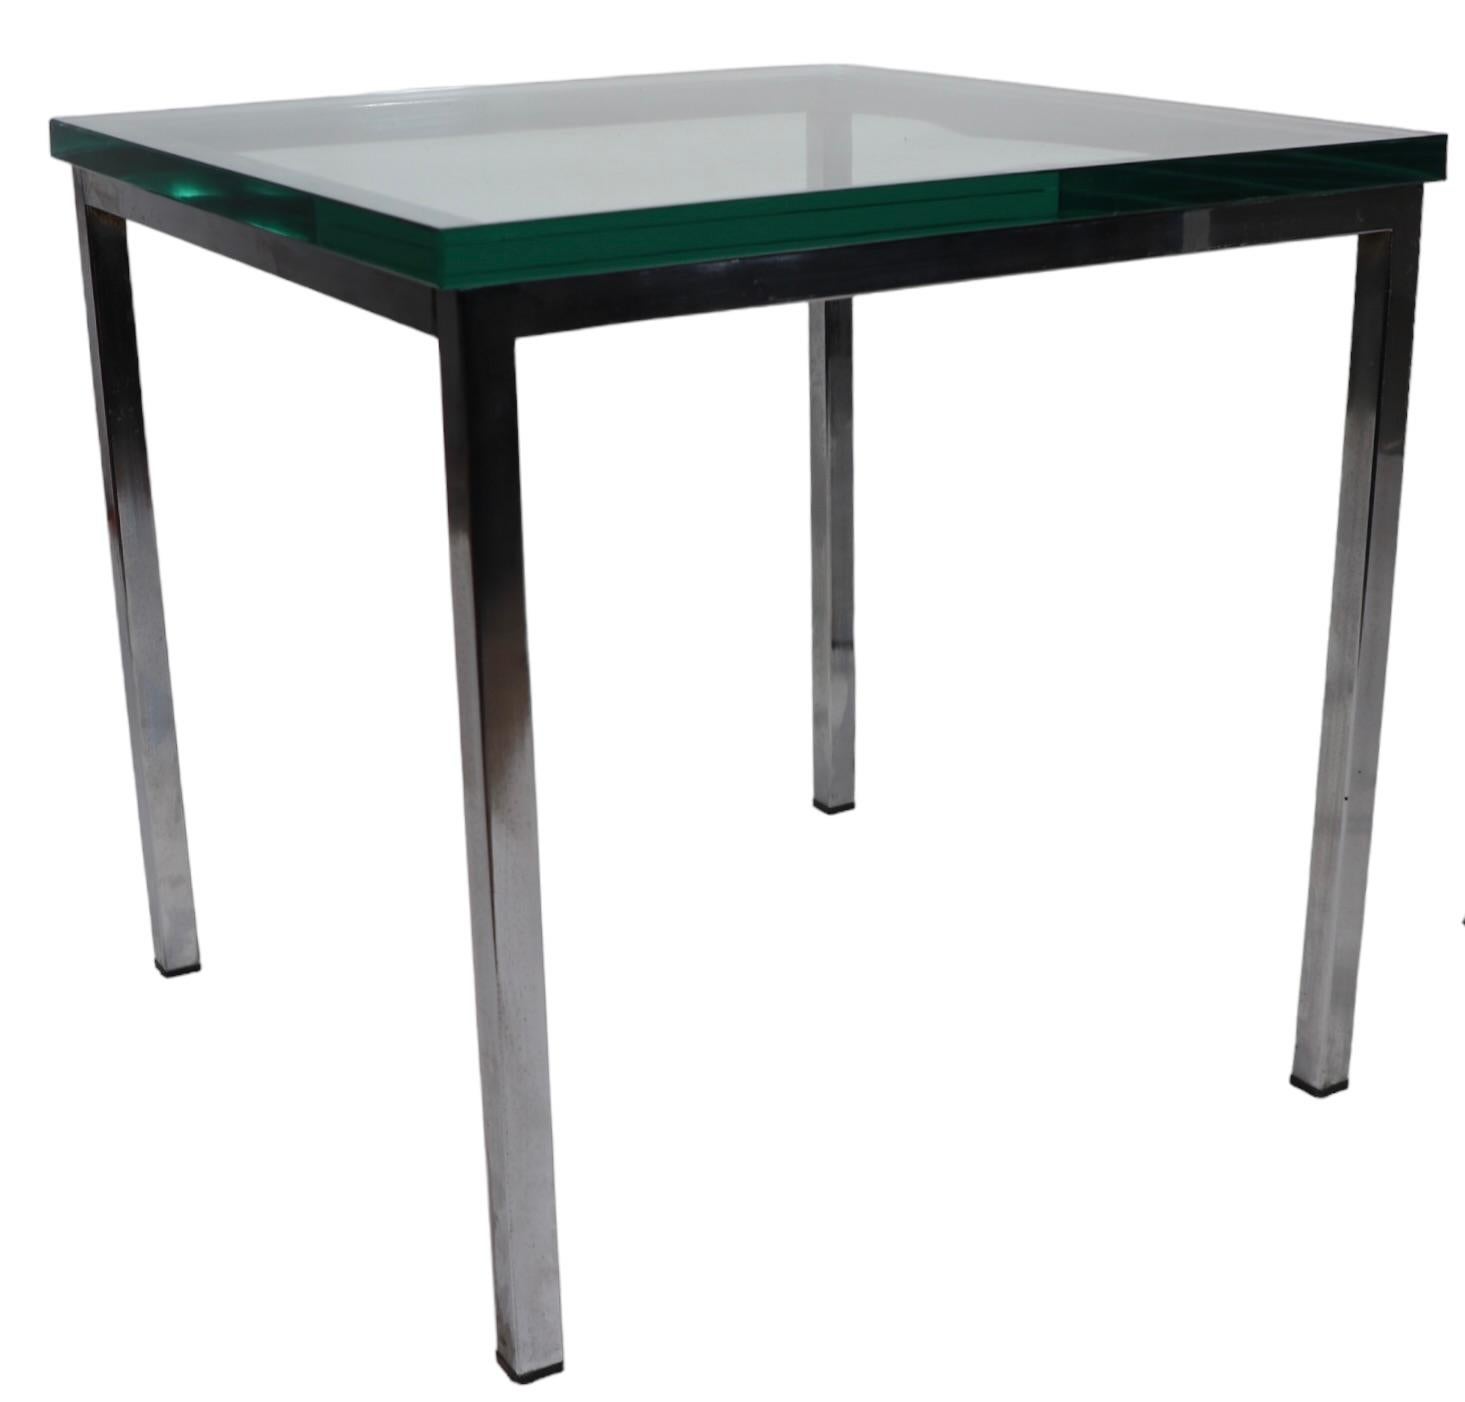 Pair of chic architectural Bauhaus, International, Post Modern style endear side tales. The tables feature bright chrome bases of squared metal, which support nice thick ( .75 in. ) glass tops. The tables are in good overall condition, with minor